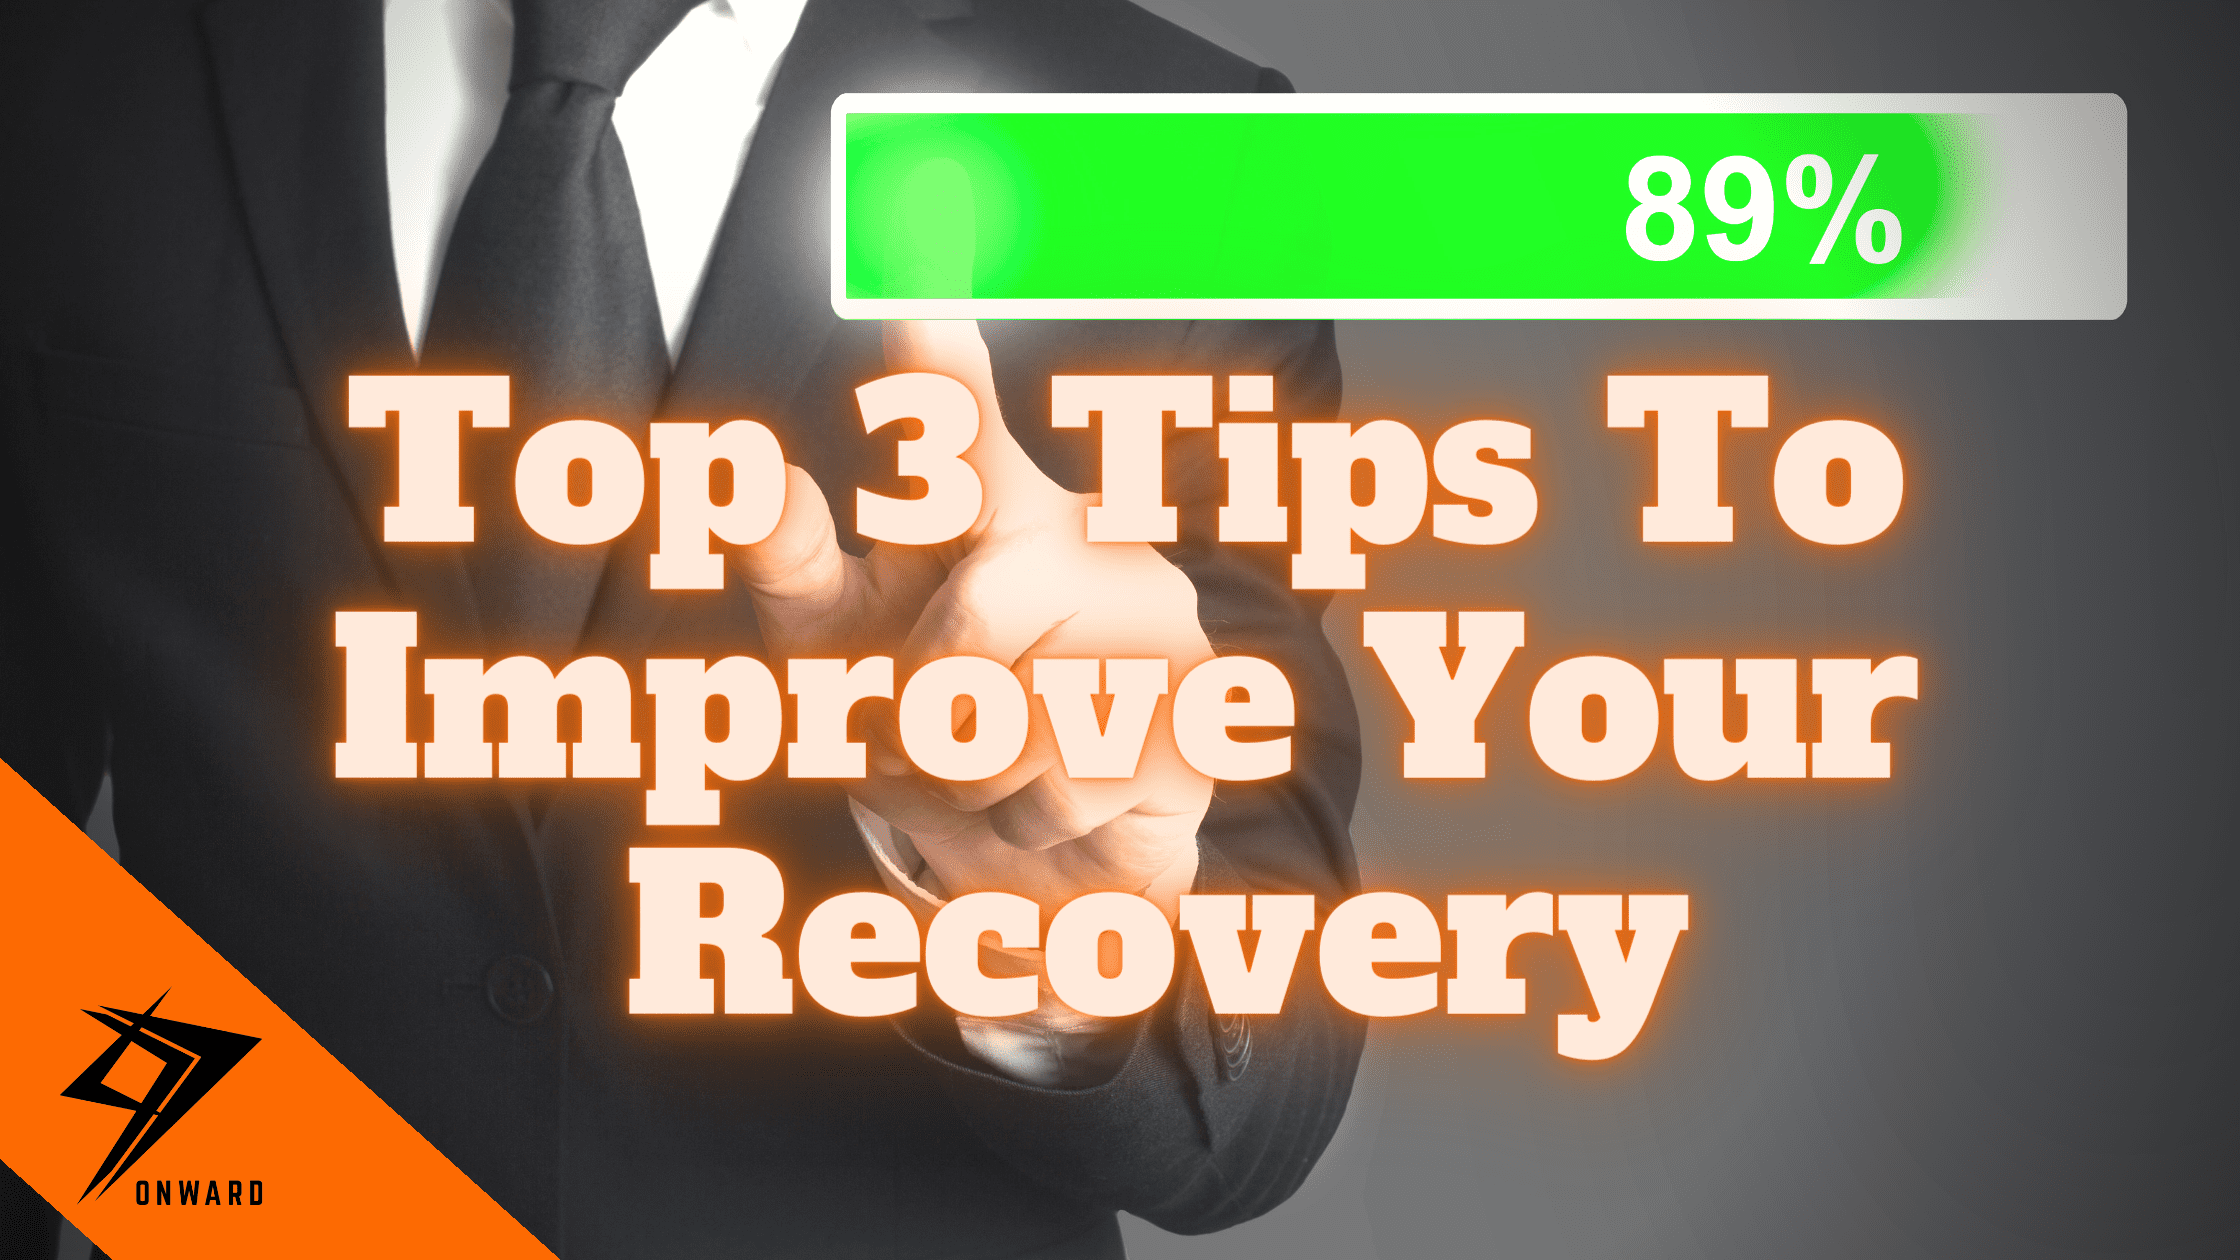 Top 3 Tips to Improve Your Recovery & Performance